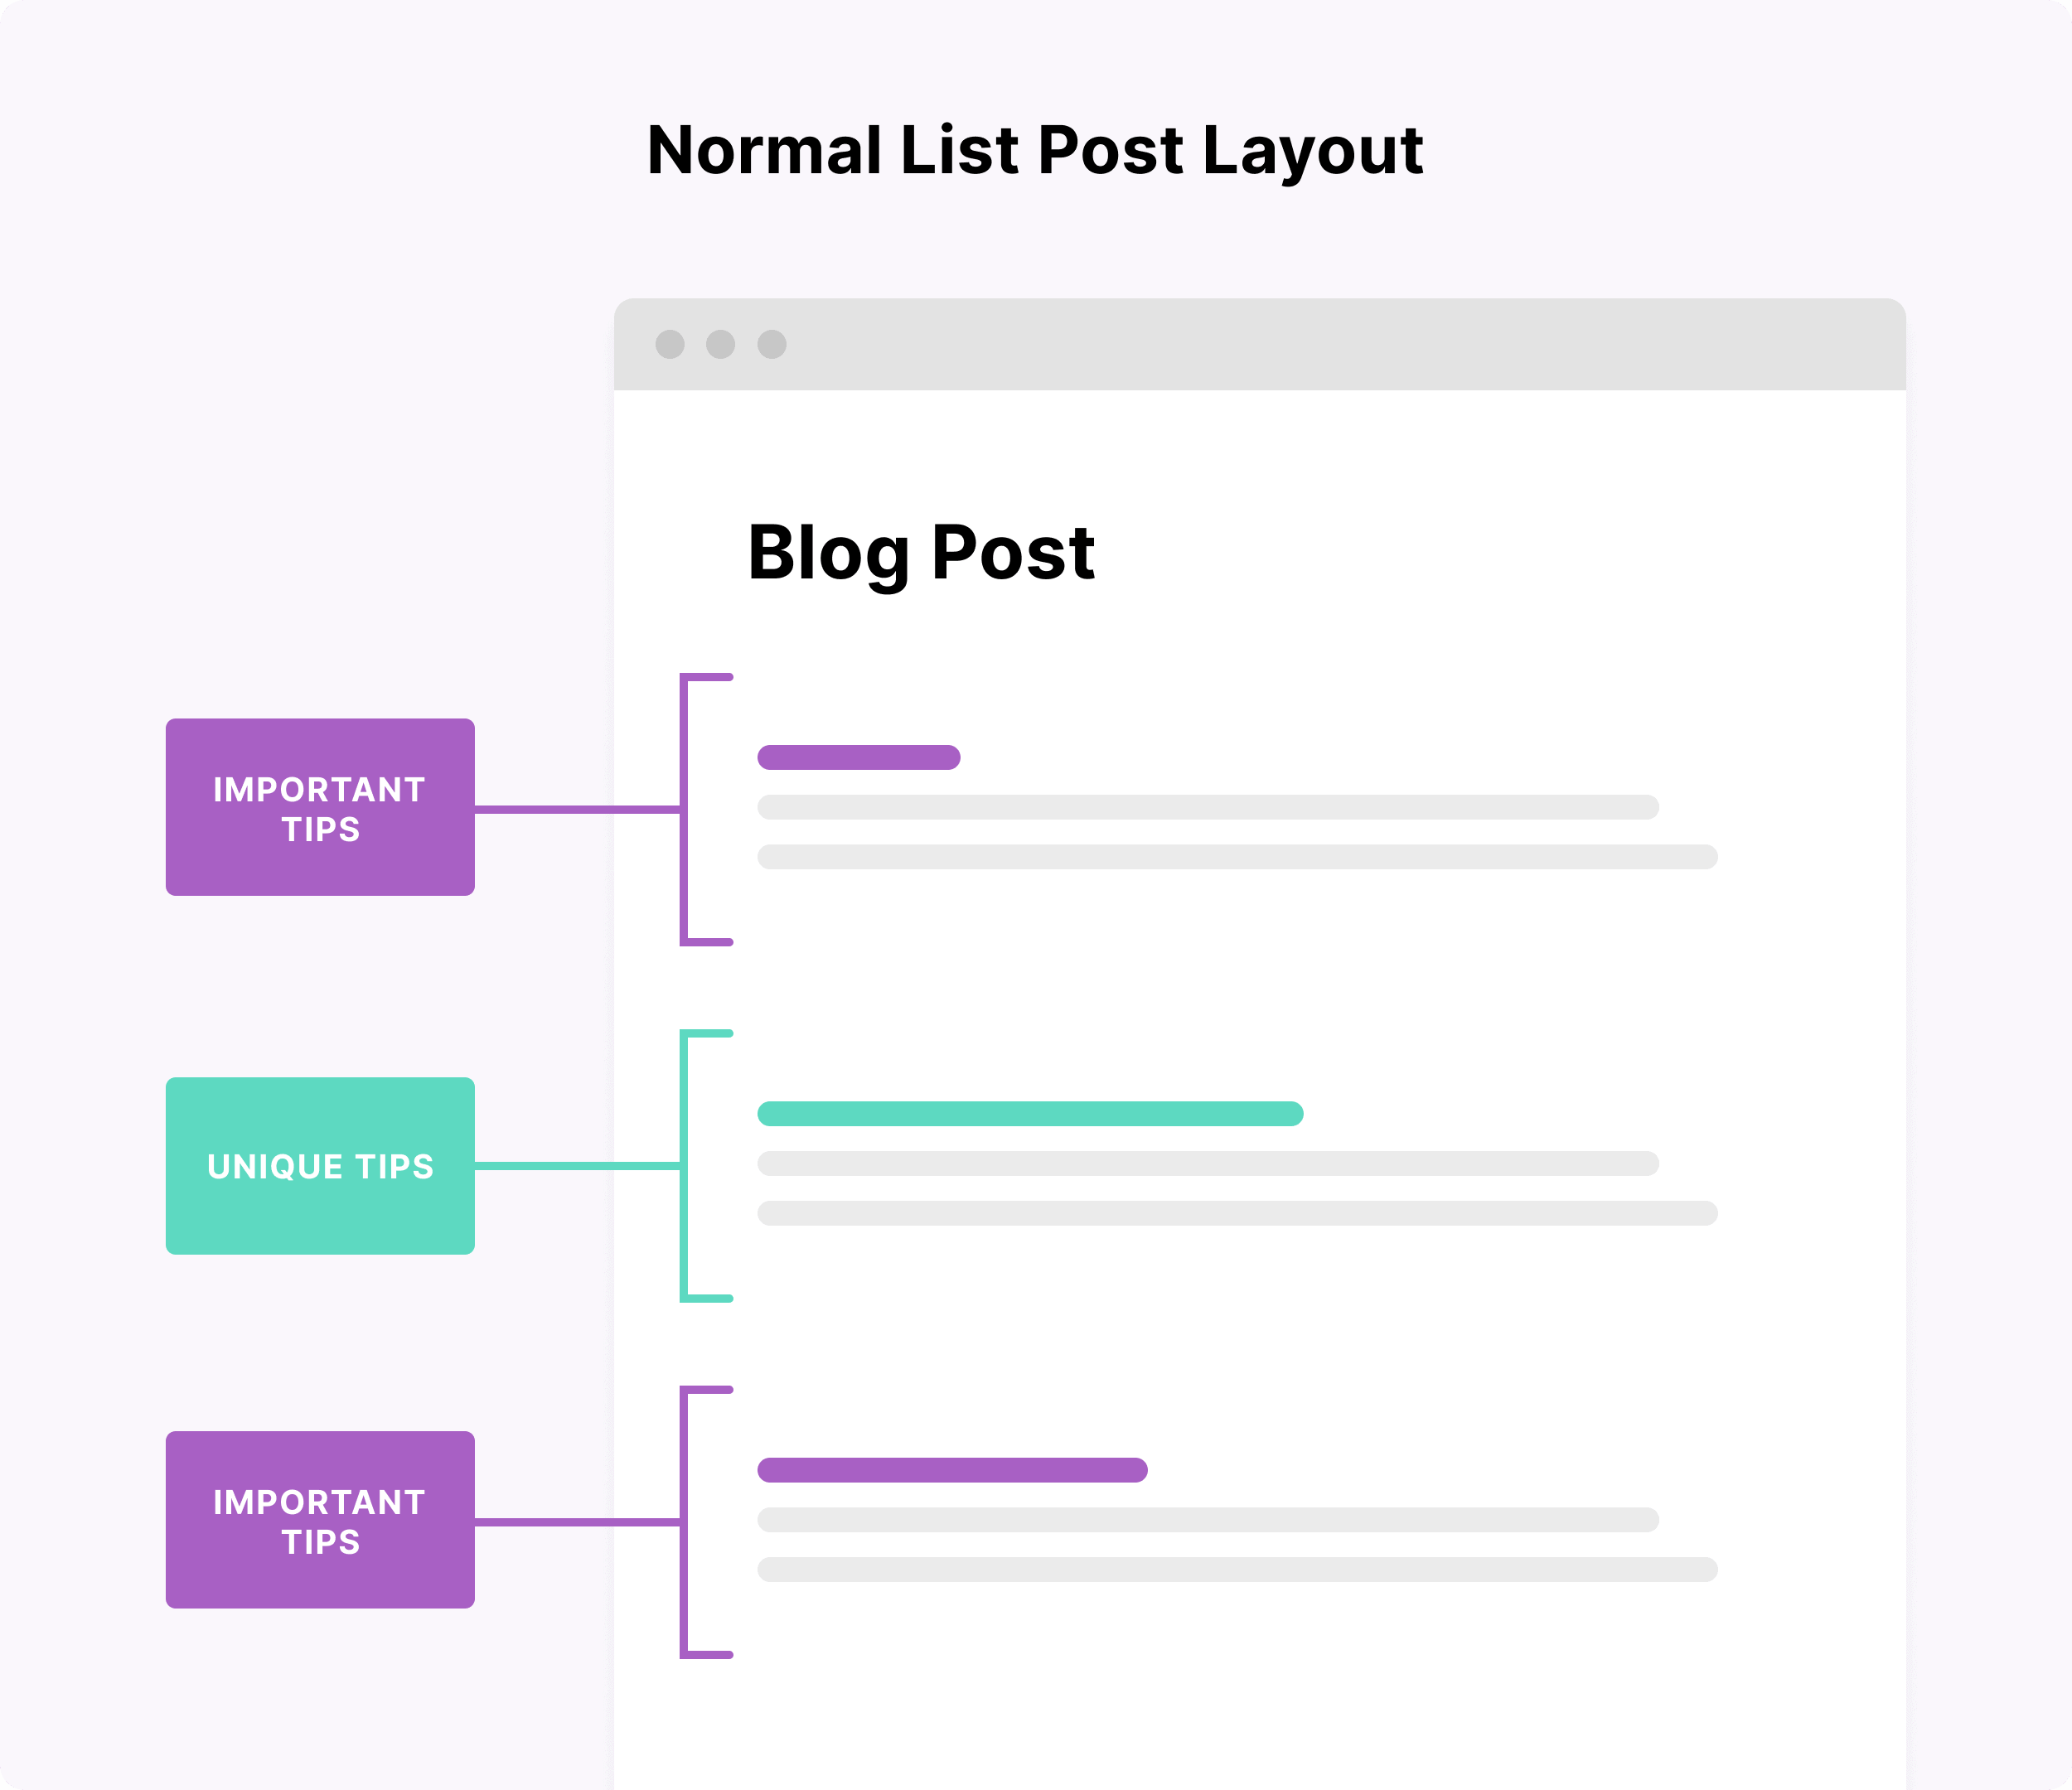 Normal list post layout